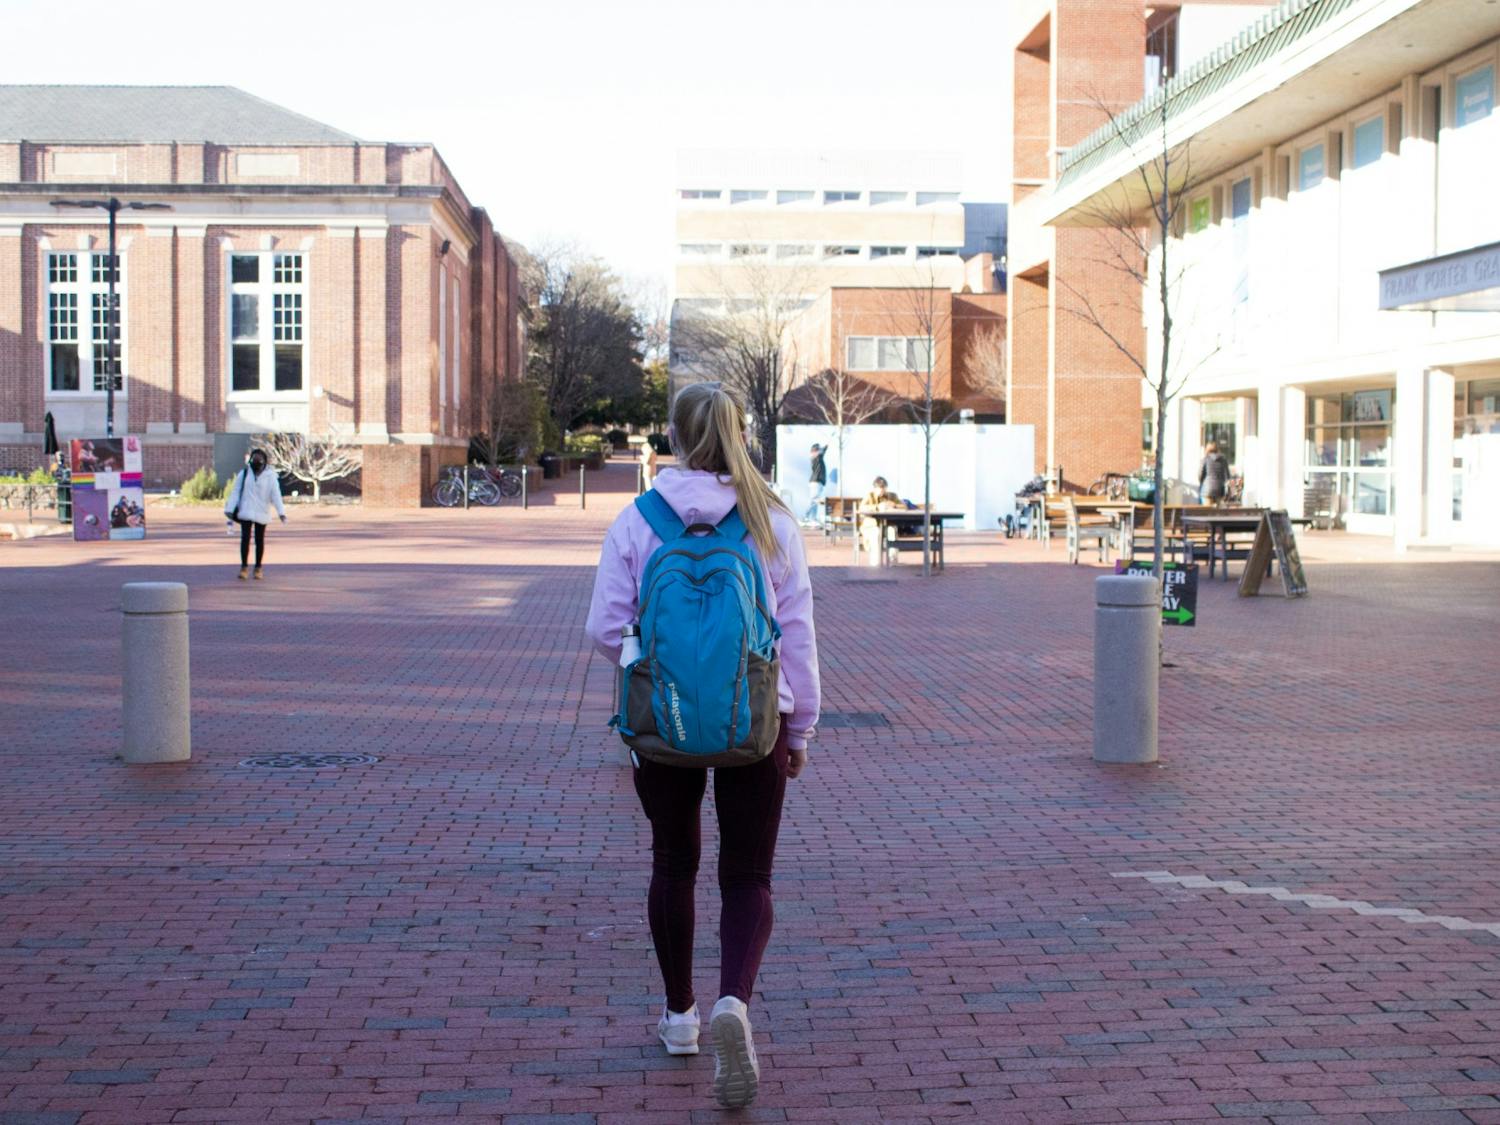 UNC Chapel Hill students returned to in person classes for the first time this spring semester on Feb. 8.